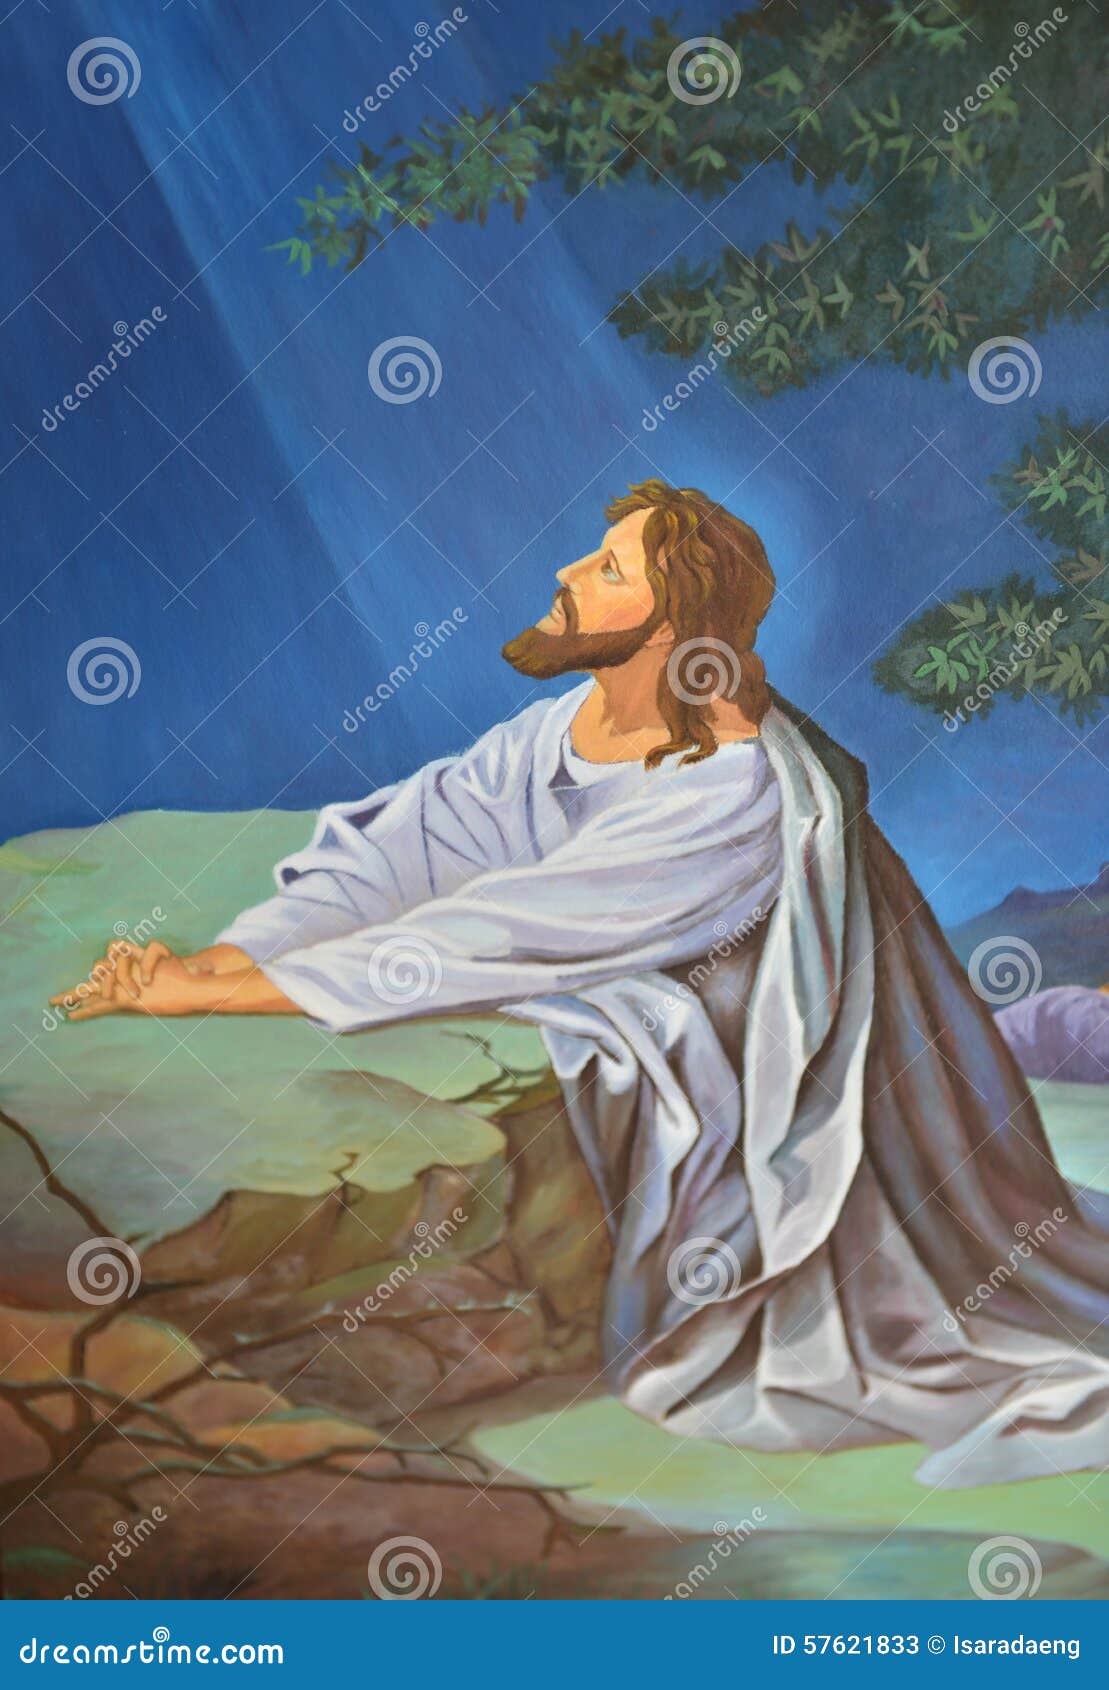 free clipart of jesus praying in the garden - photo #22